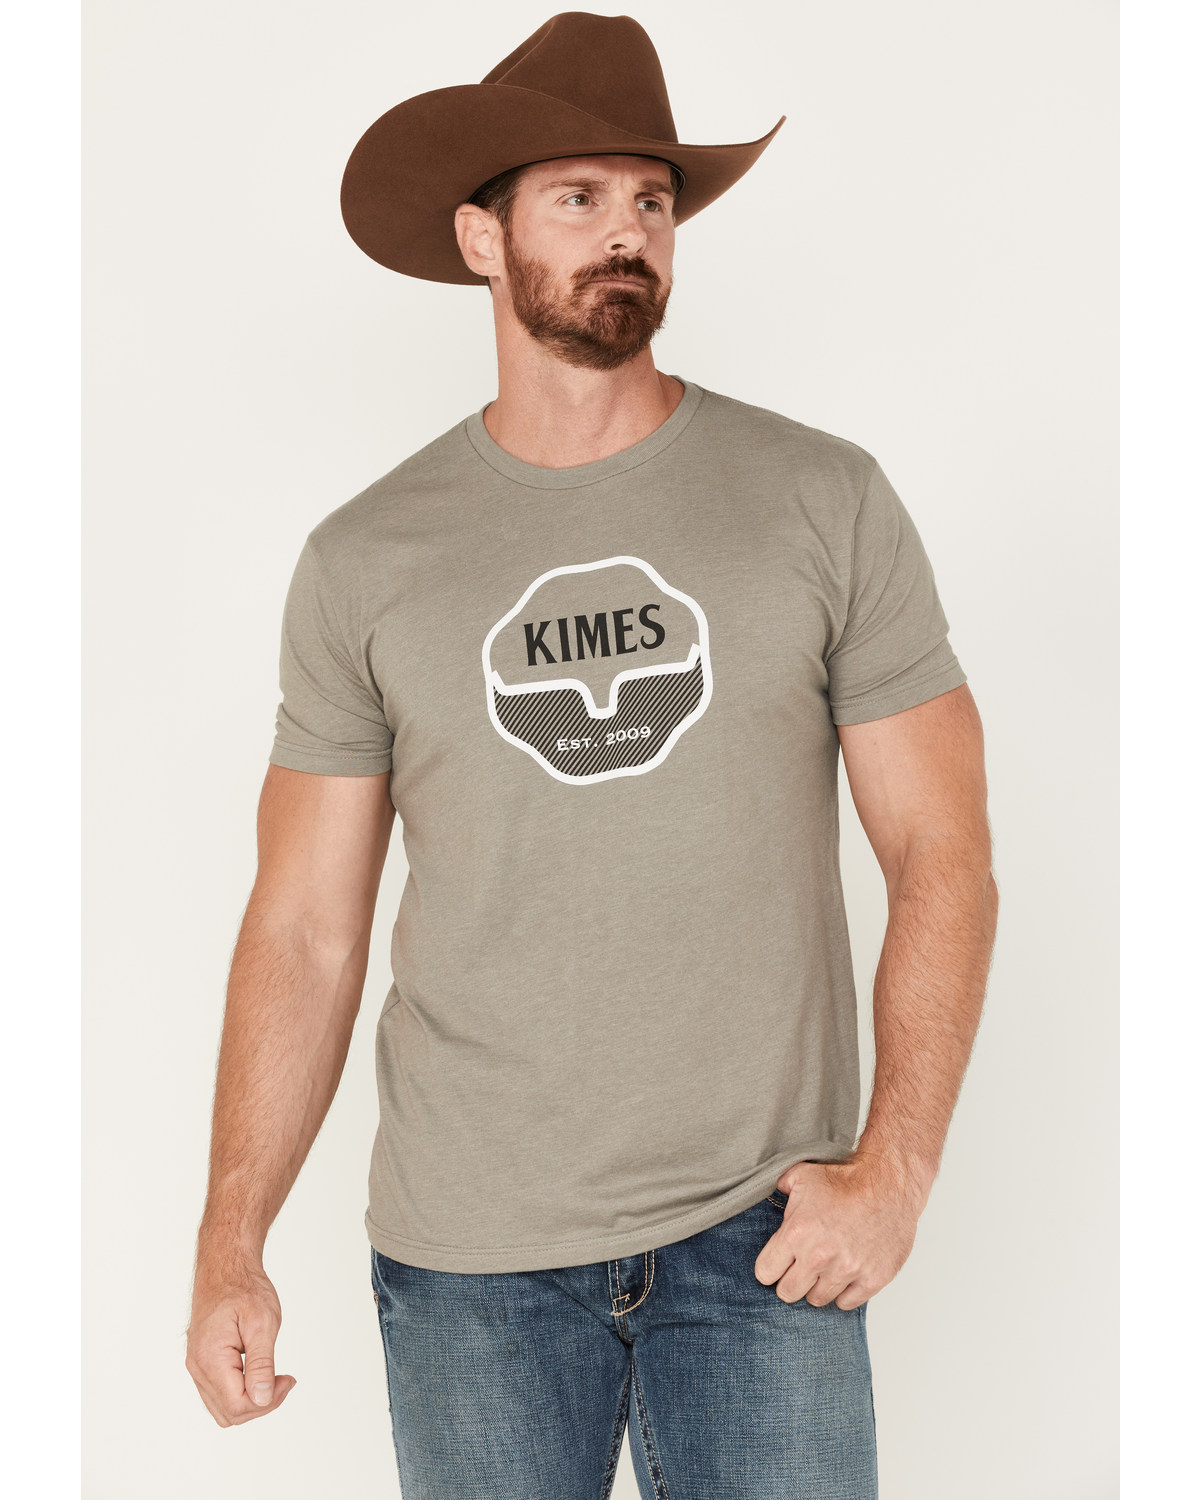 Kimes Ranch Men's Boot Barn Exclusive Notary Graphic Short Sleeve T-Shirt